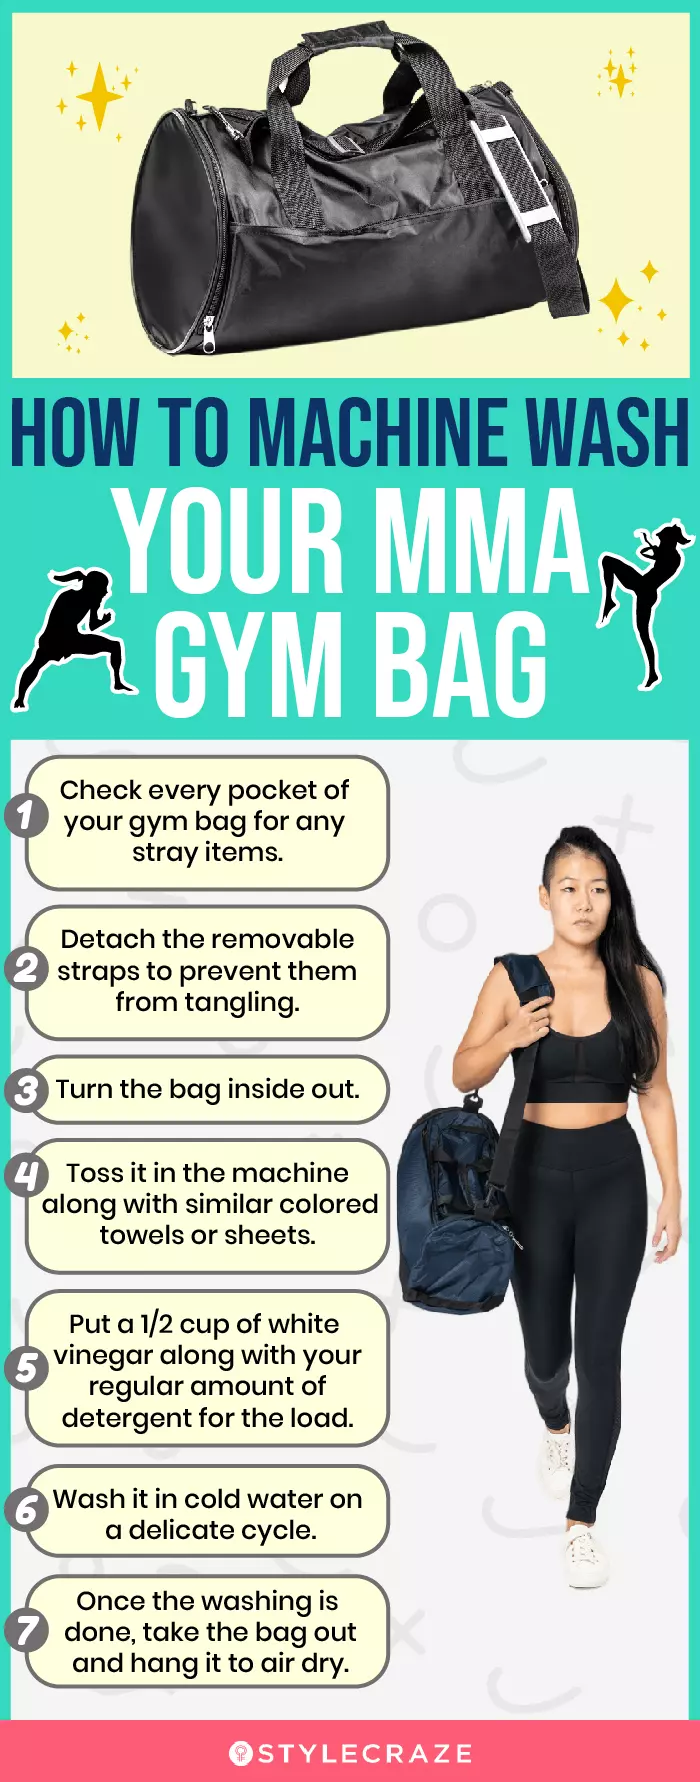 How To Machine Wash Your MMA Gym Bag (infographic)